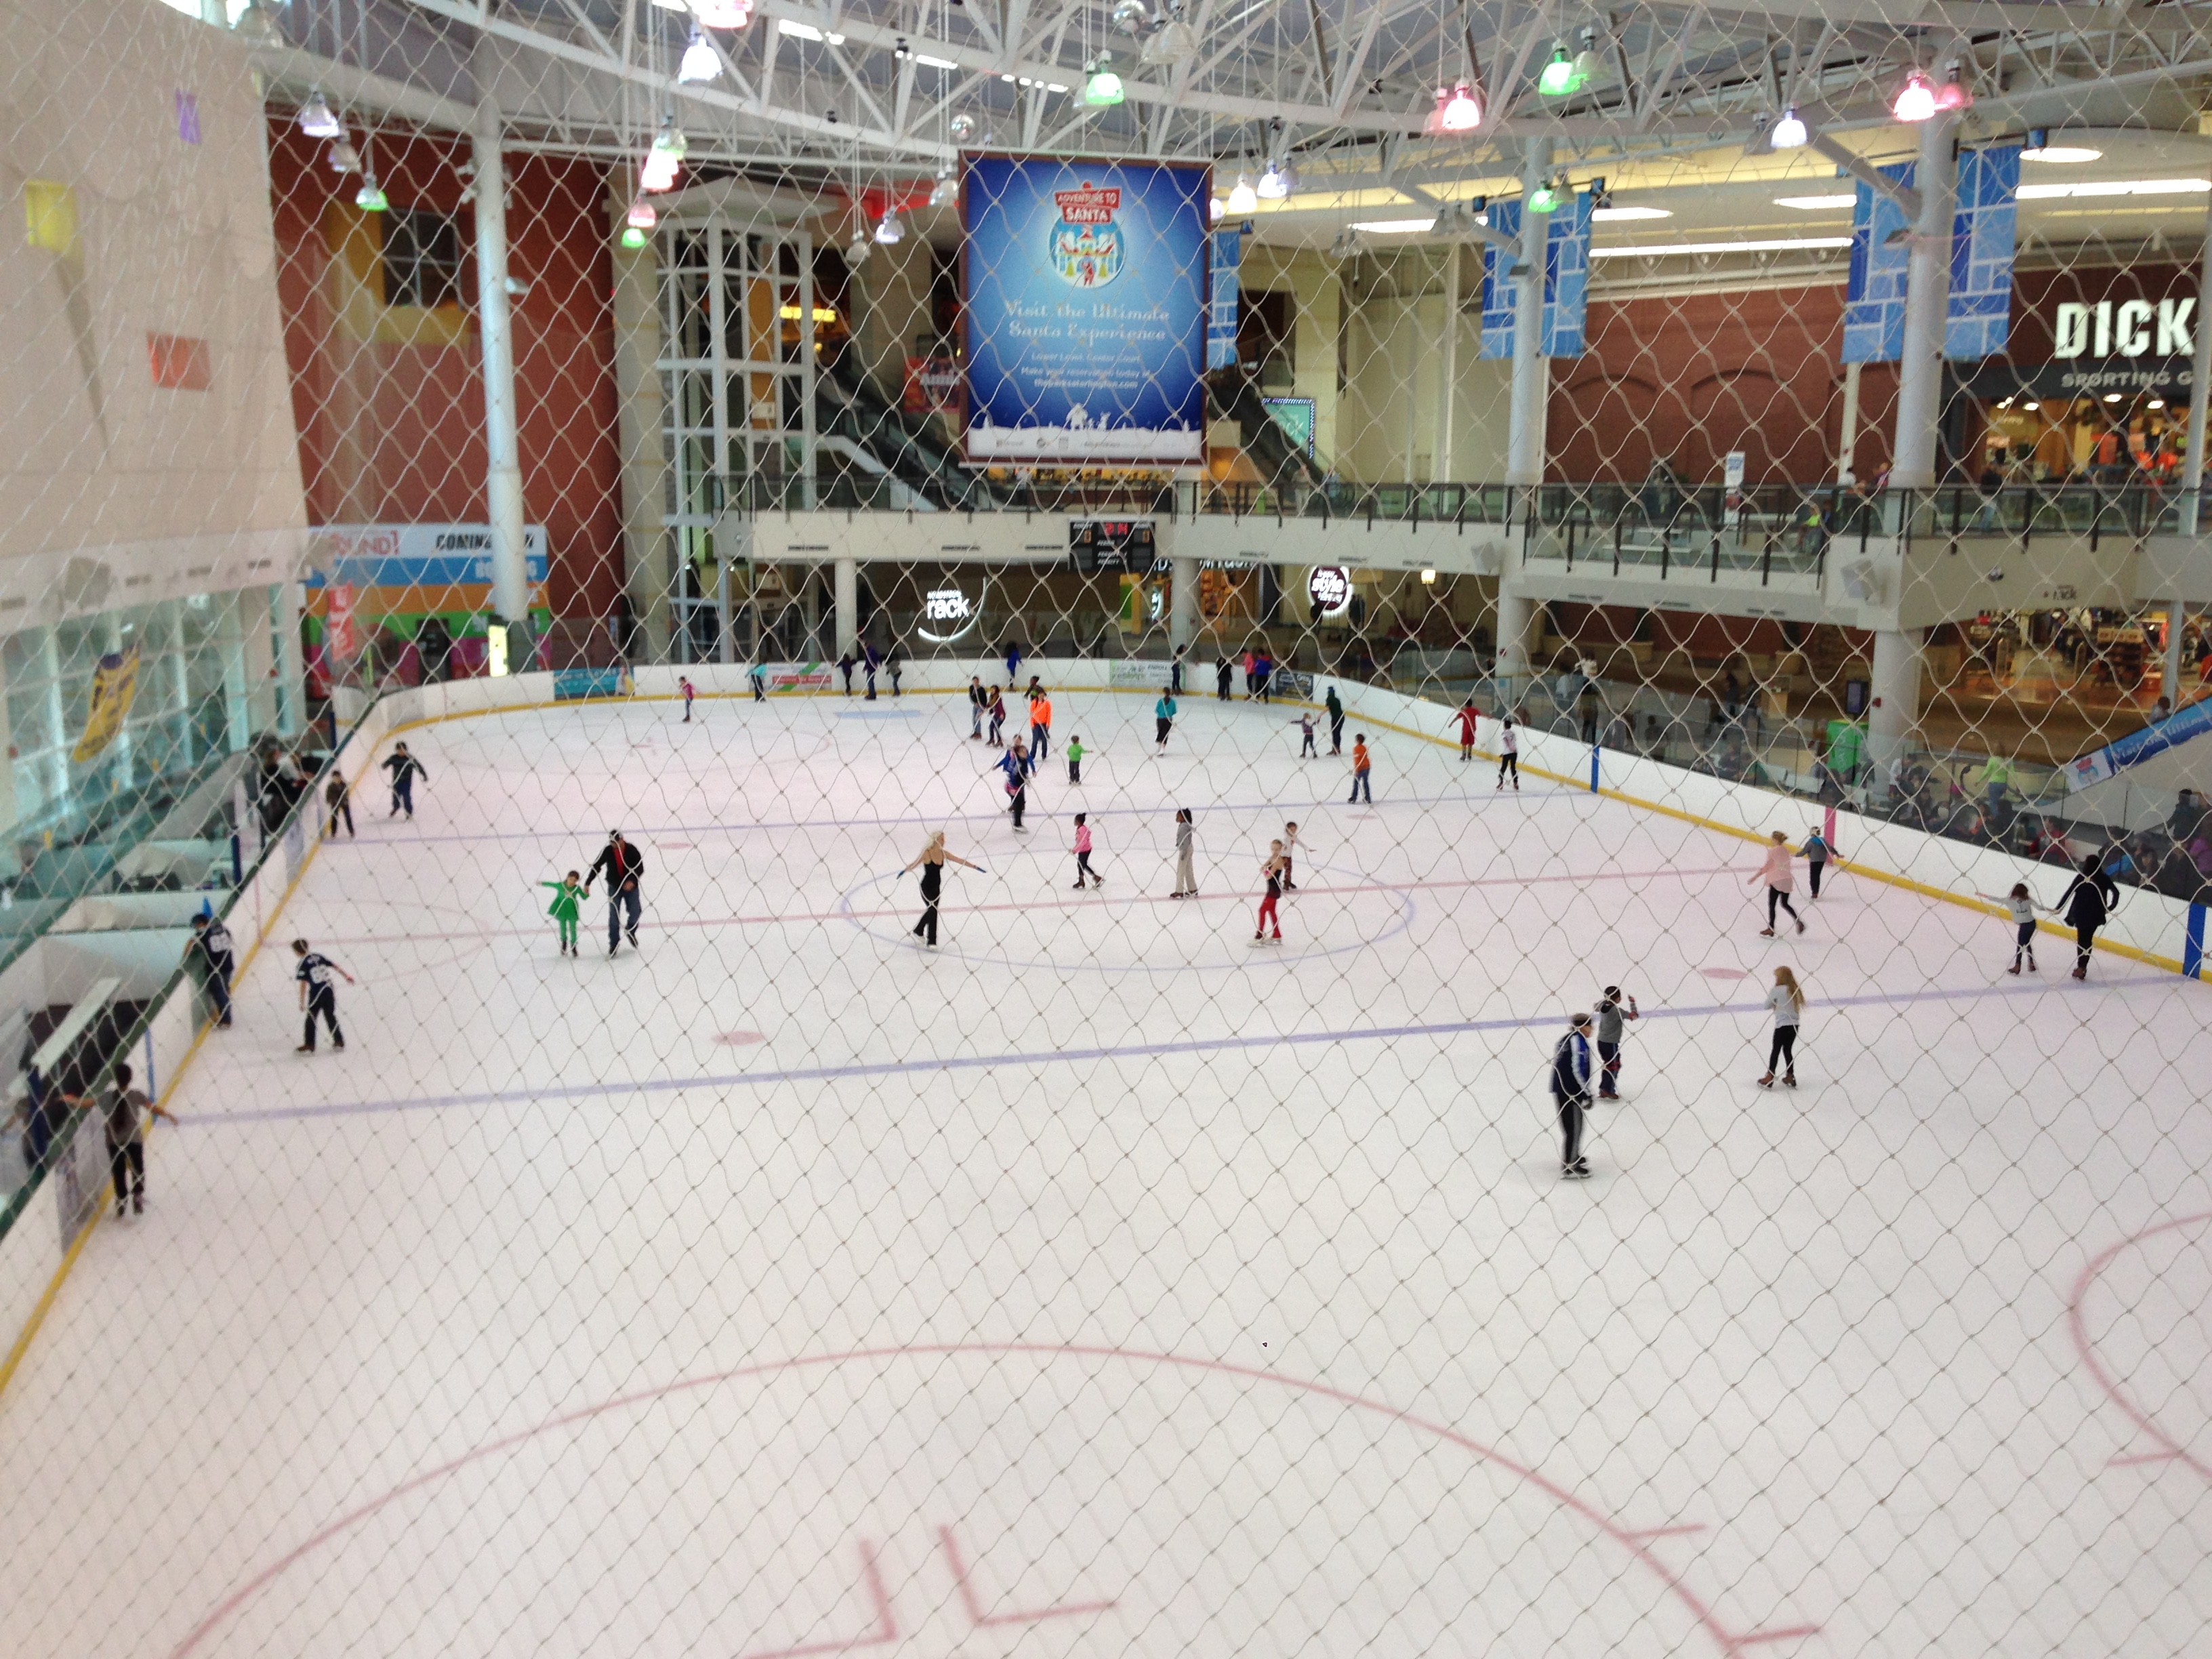 "Ice Rink" inside The Parks mall - I was thrilled to see this! I only wished that I had my own ice skates to enjoy it.